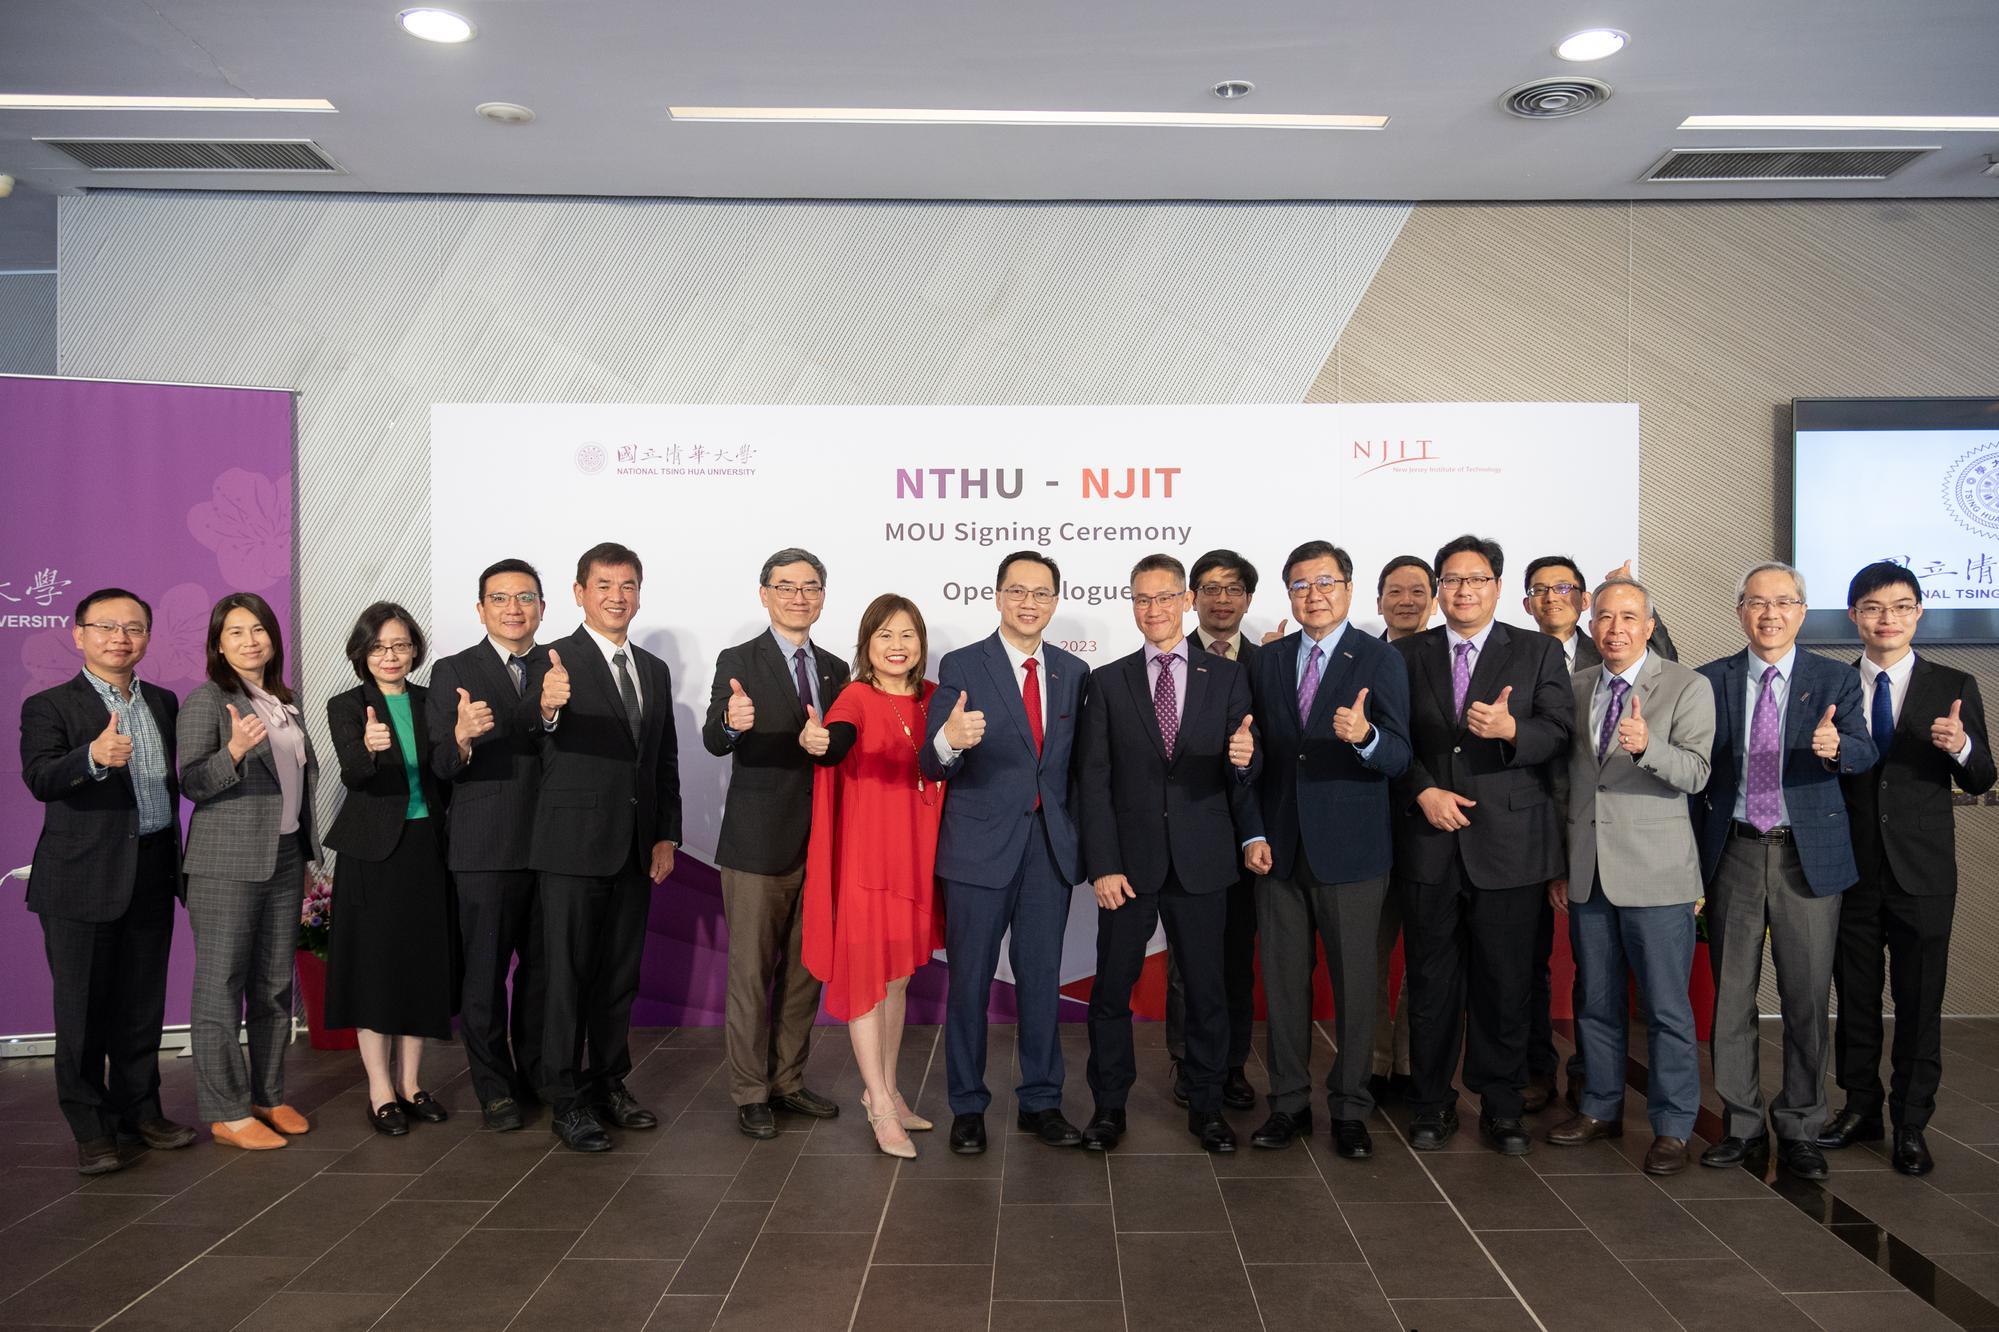 Group photo at the signing ceremony for the memorandum of understanding between NTHU and NJIT.